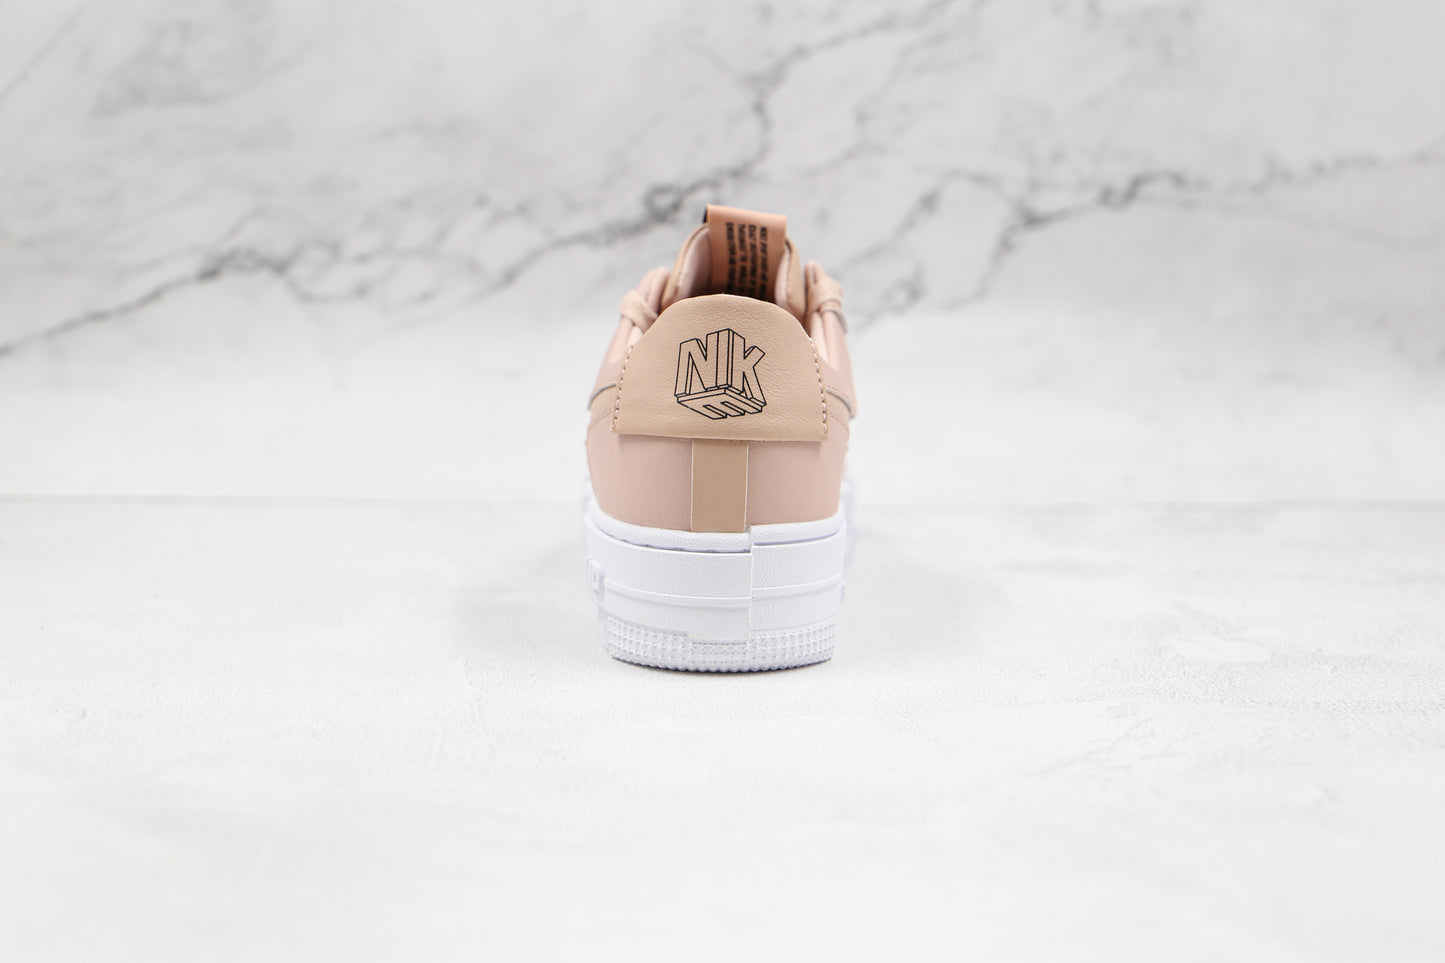 Nike Air Force 1 Pixel Particle Beige